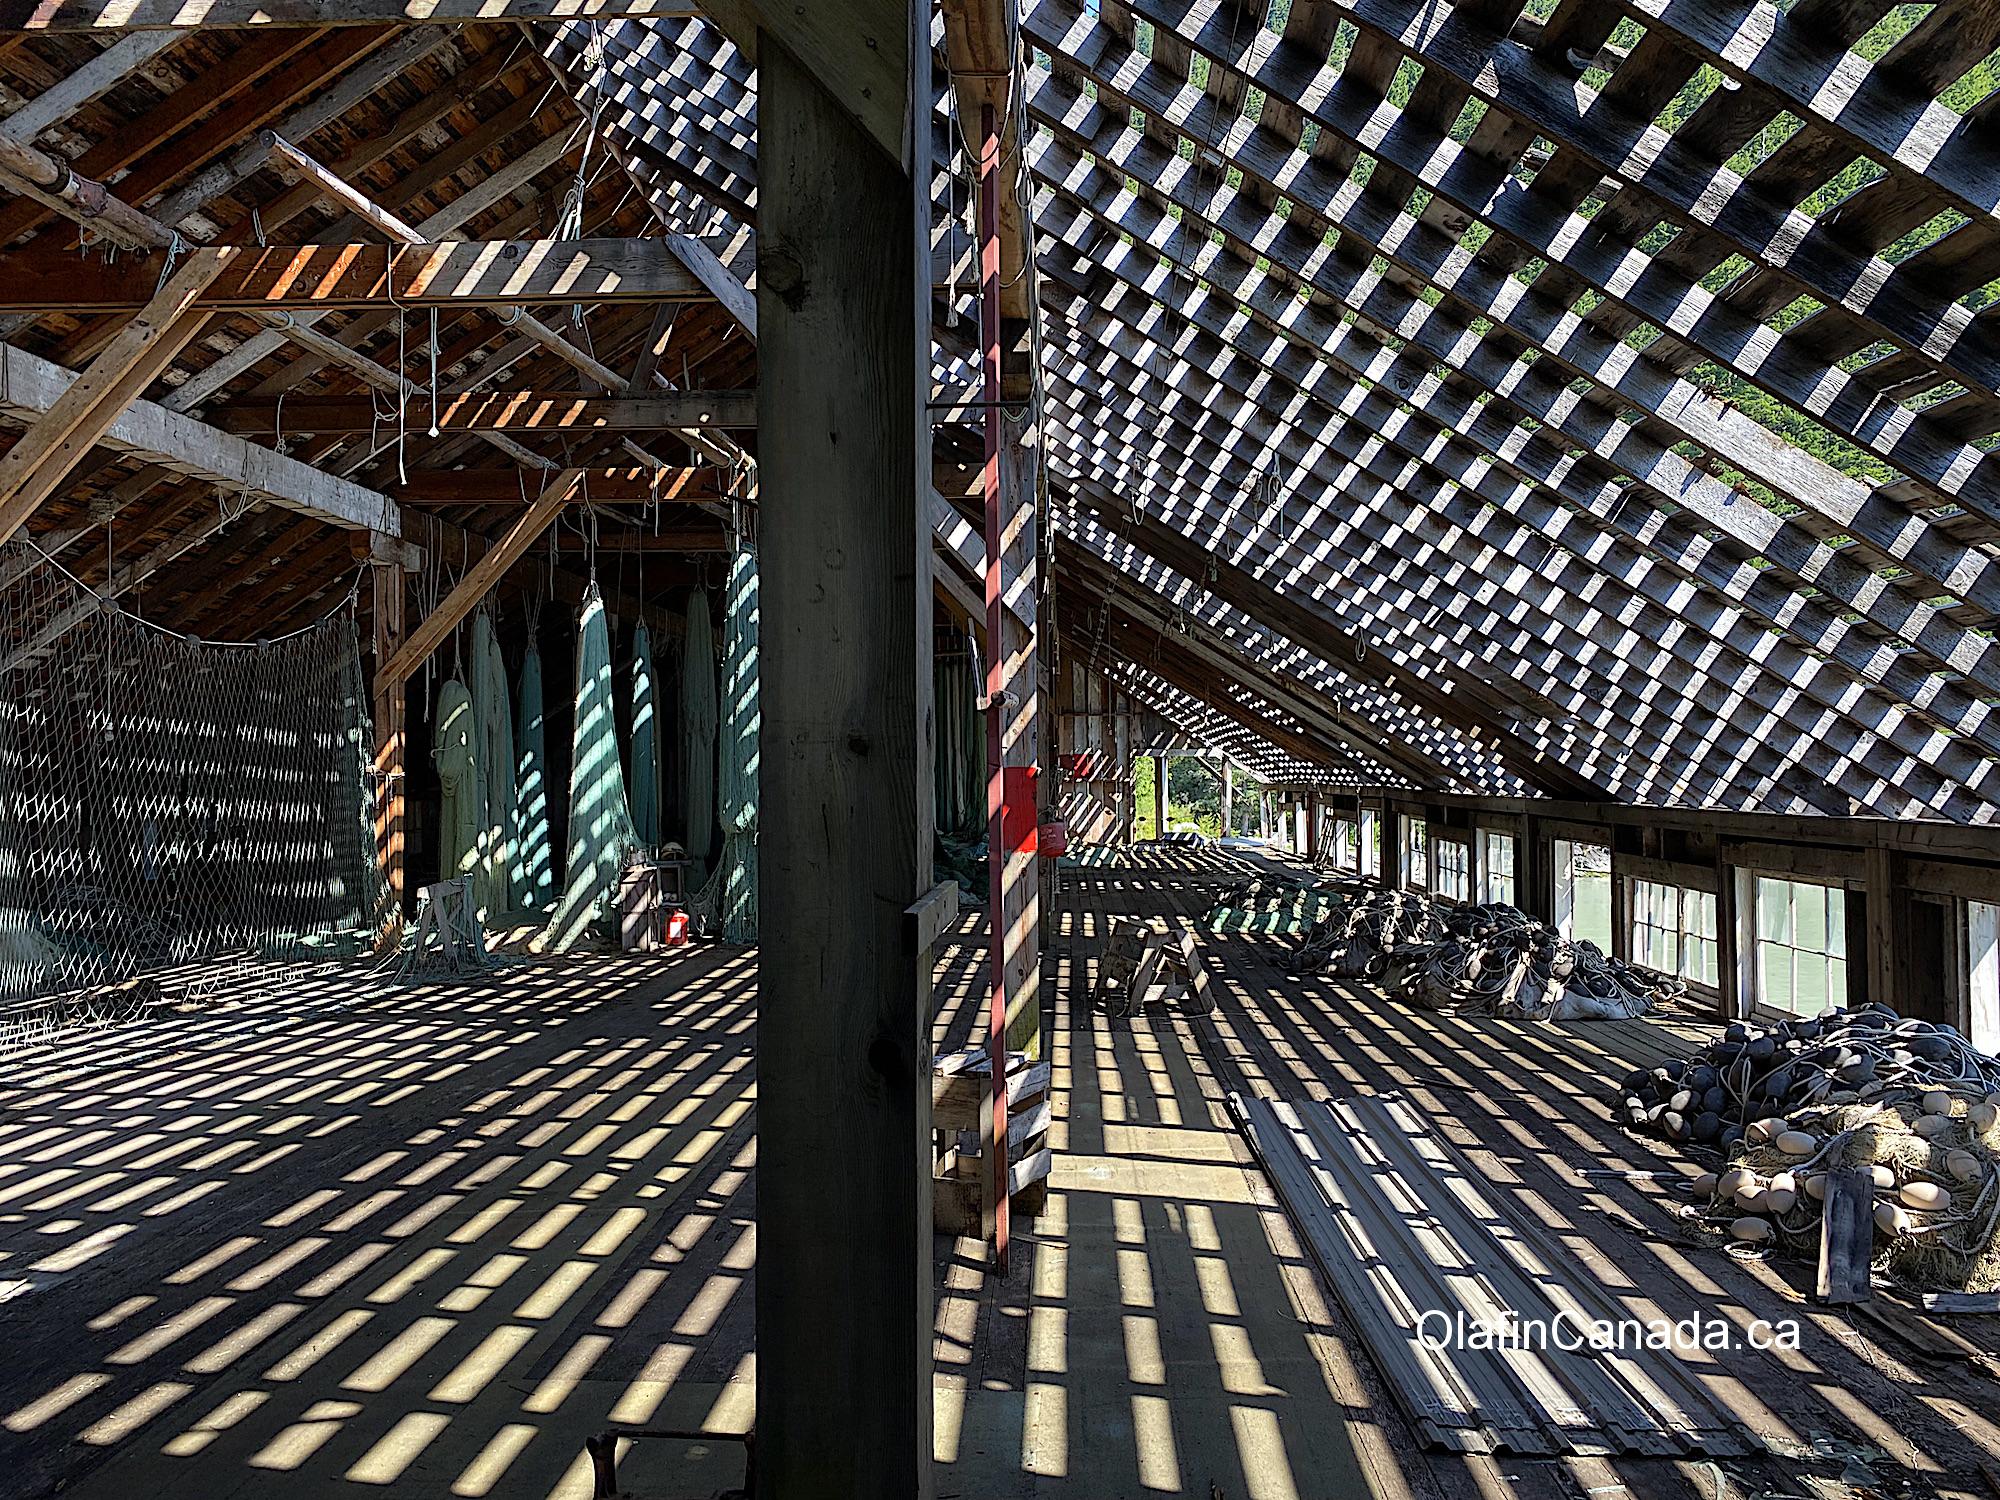 First floor in the sun of the cannery with sunlight through the roof #olafincanada #britishcolumbia #discoverbc #abandonedbc #tallheocannery #bellacoola